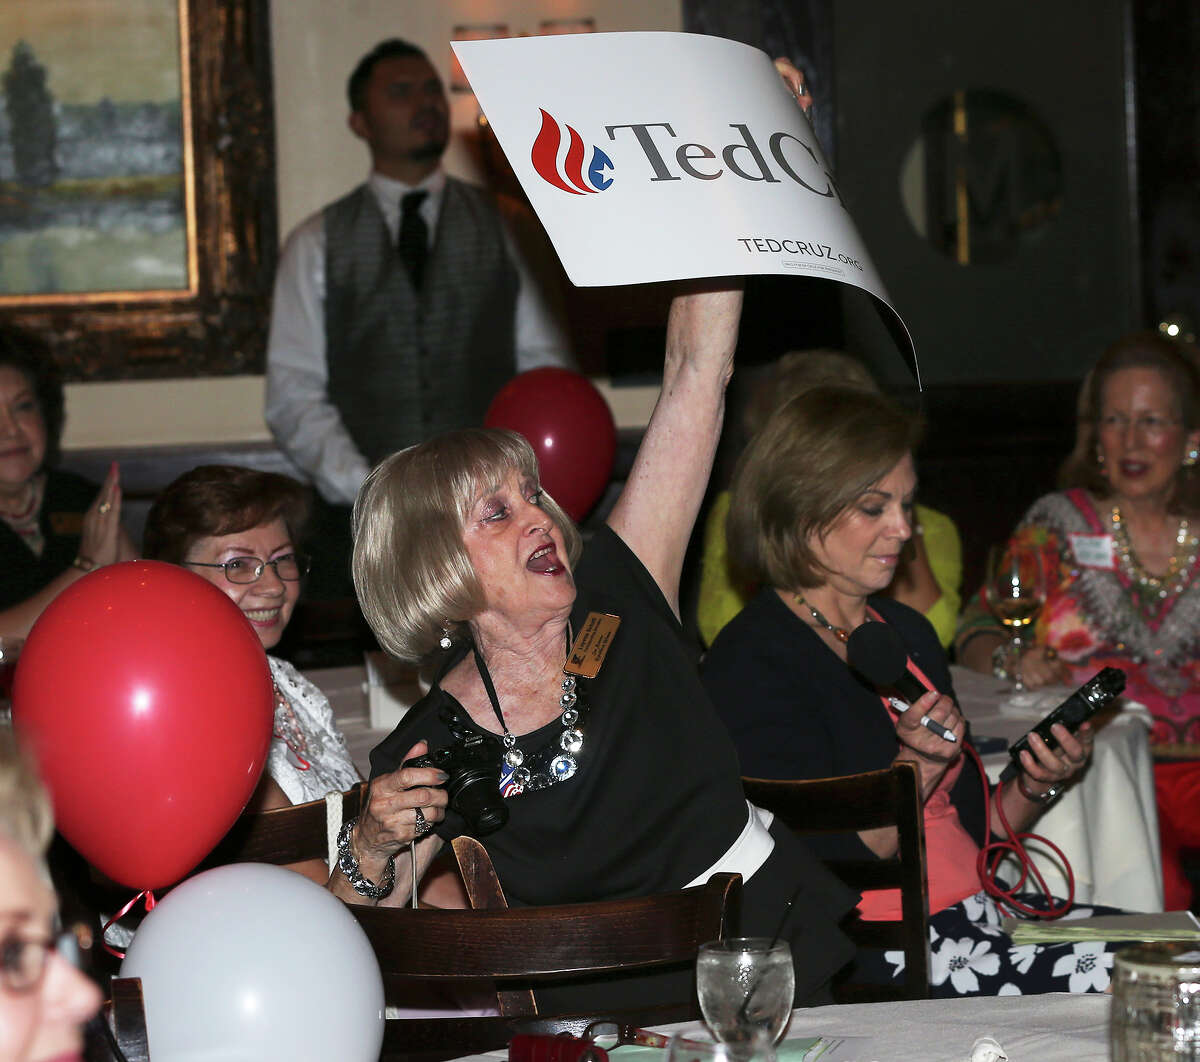 Loyette Schott roots for her candidate during the GOP debate watch party at Maggiano's Little Italy on August 6, 2015.